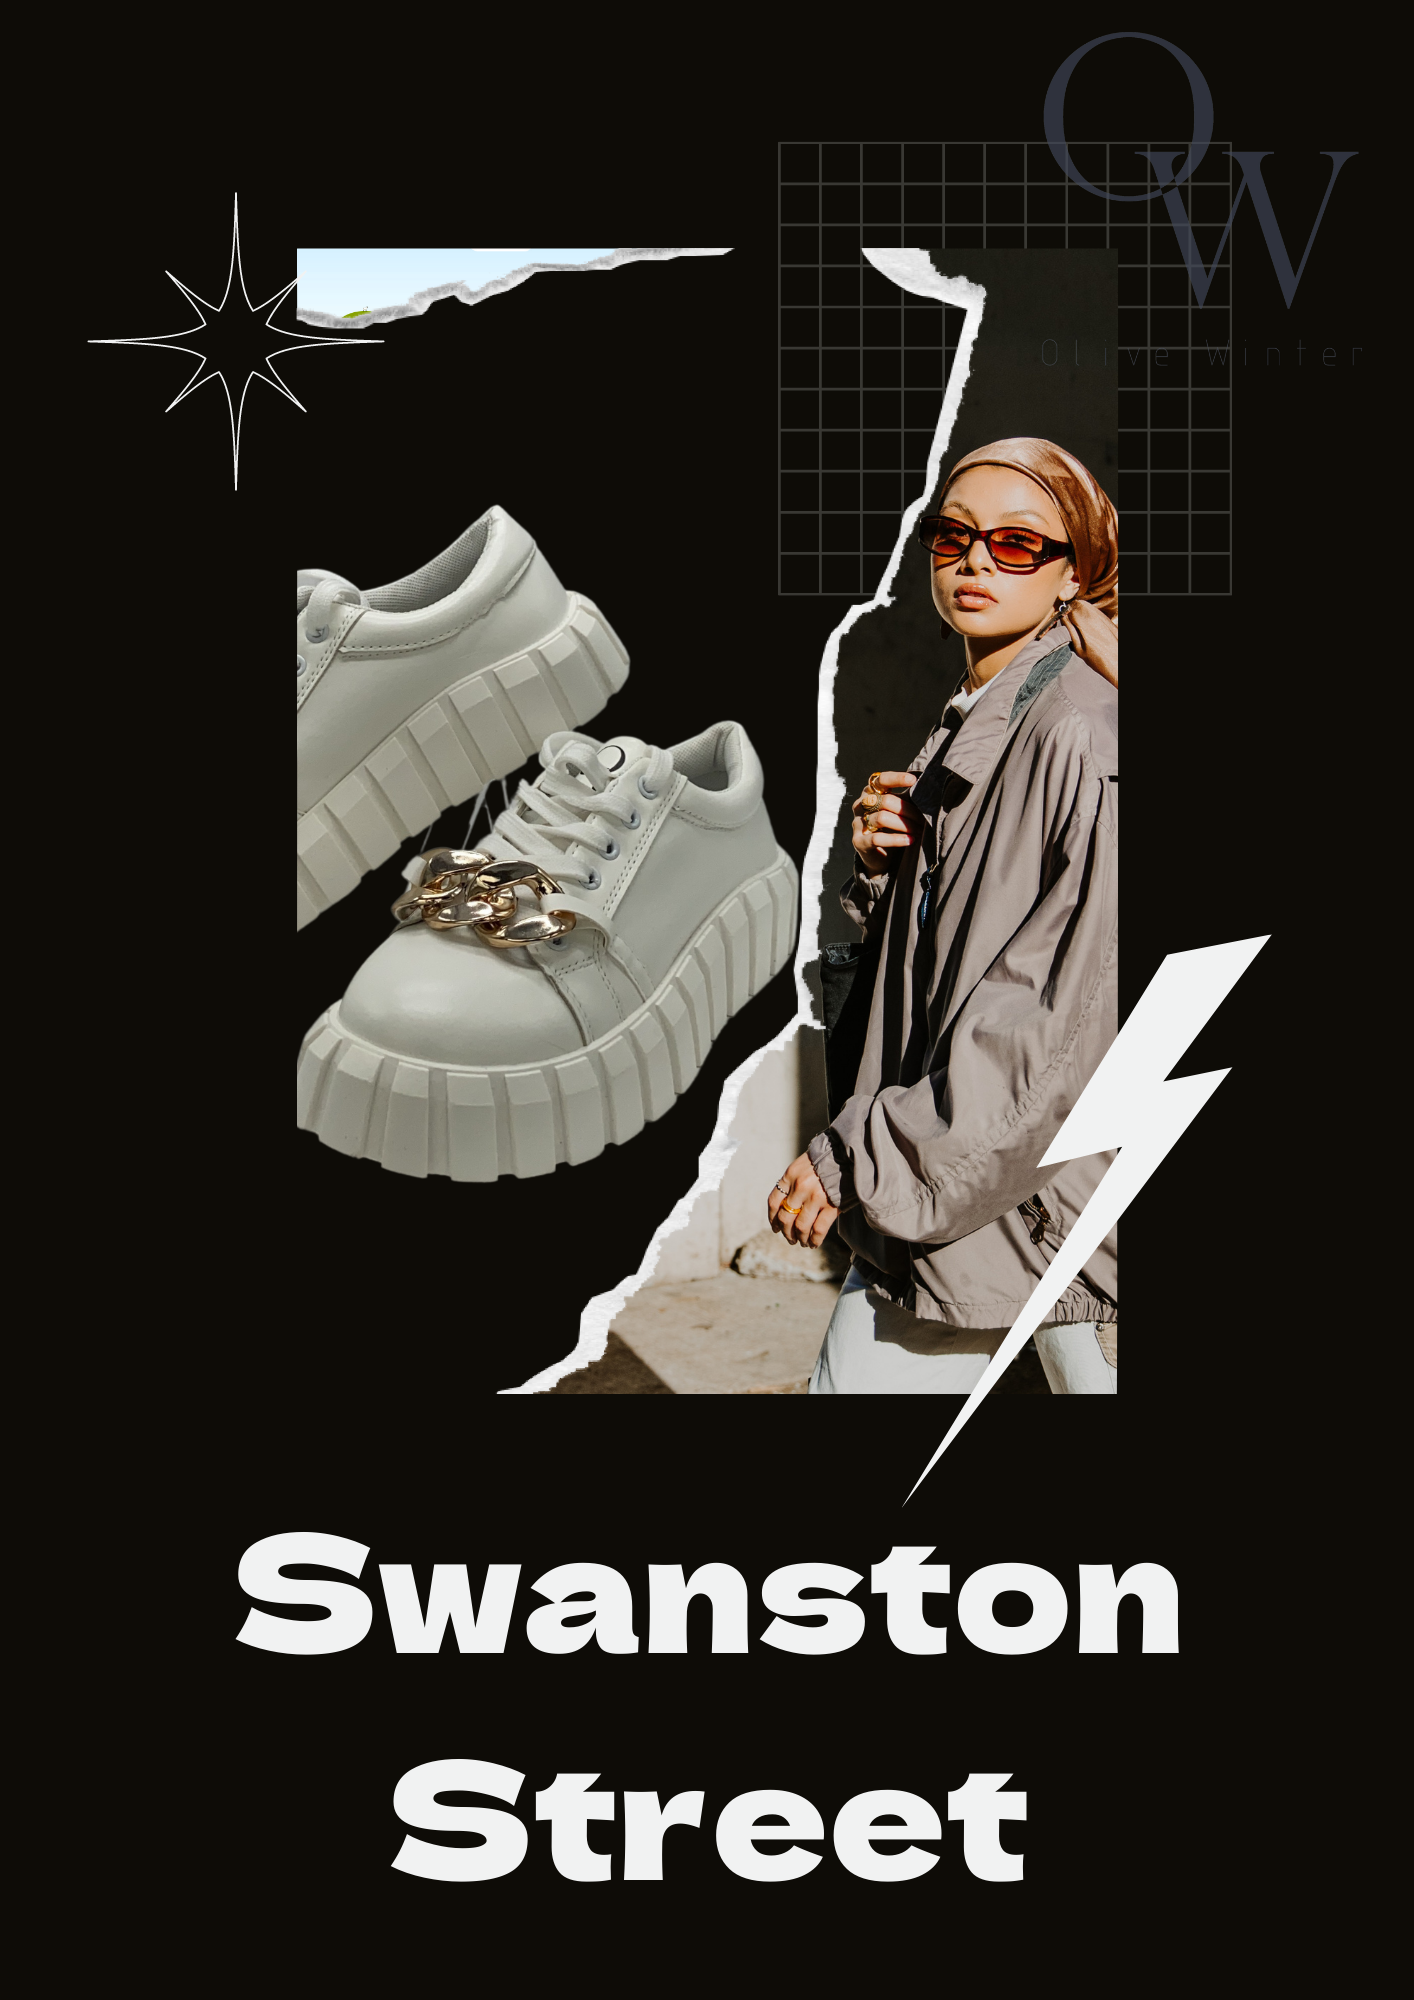 What to wear with a pair of Swanston Street casual sneakers